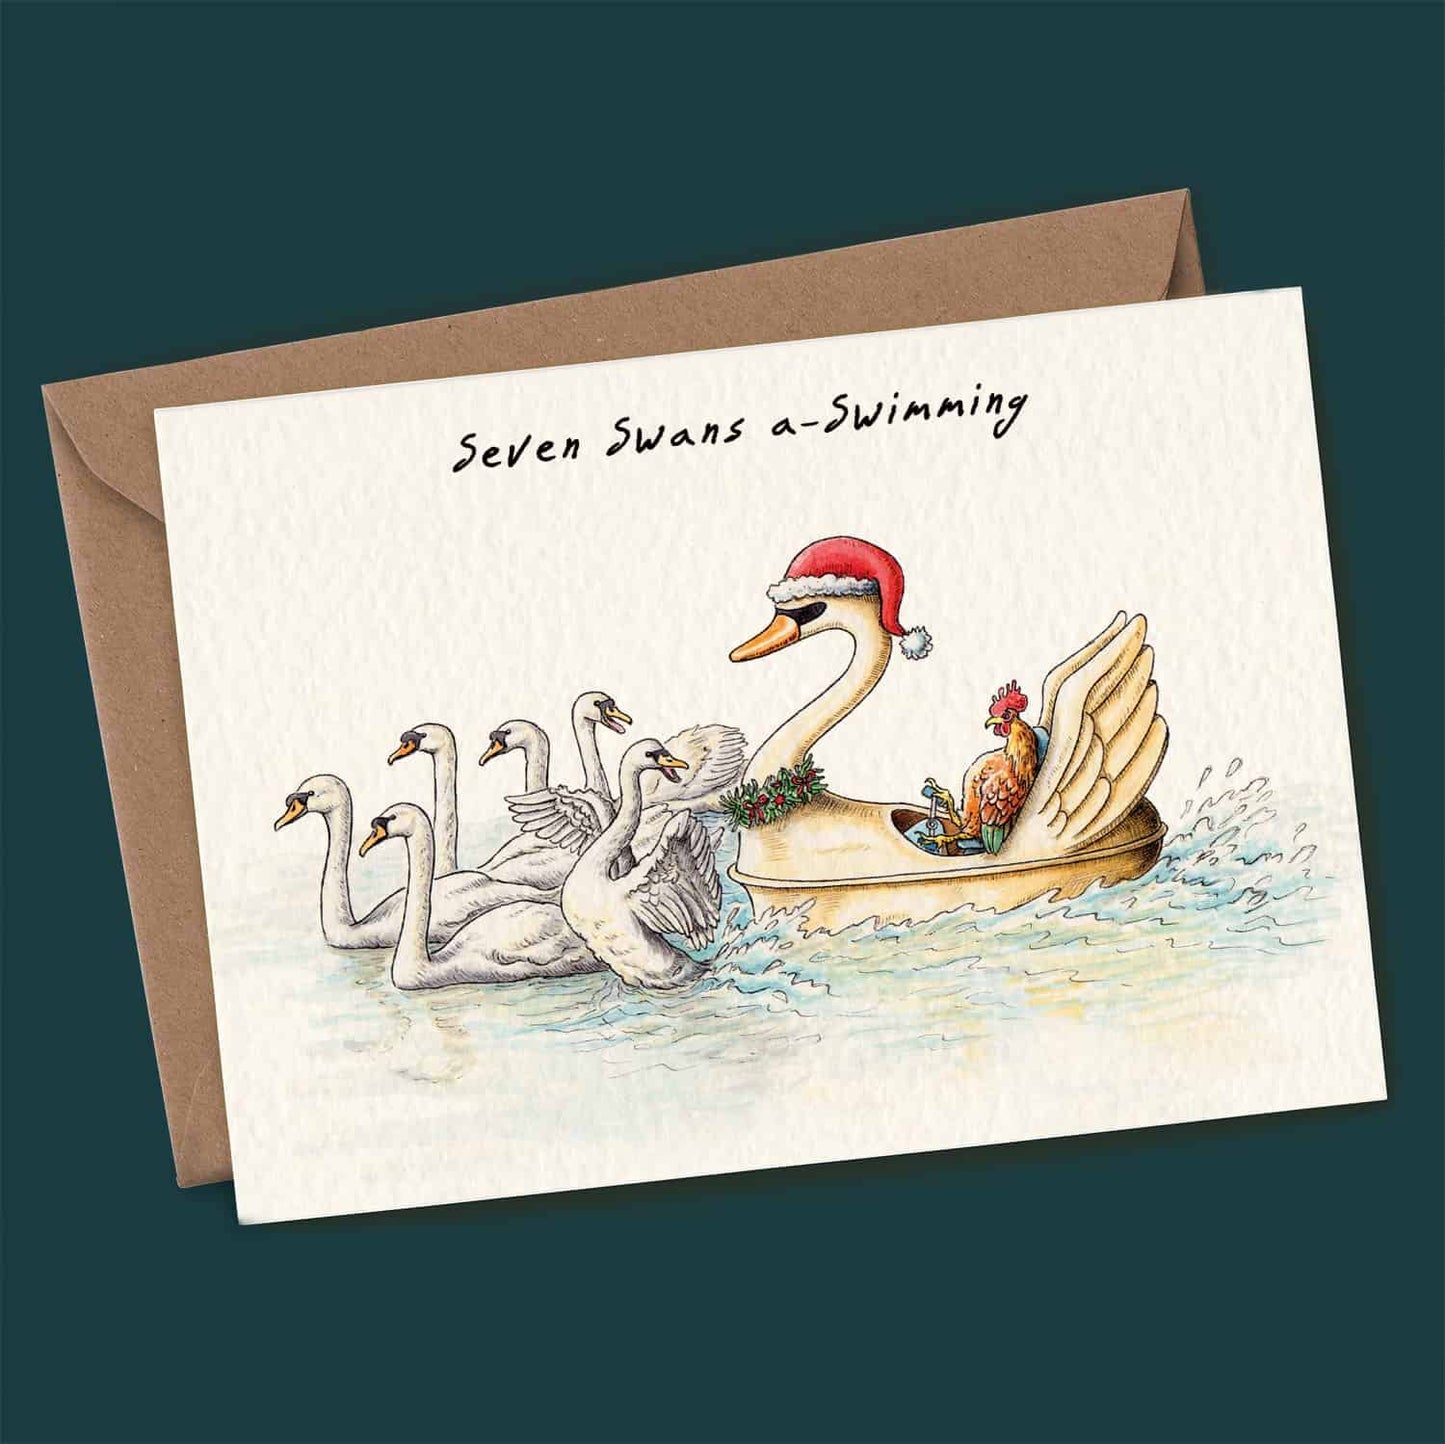 Seven Swans a-Swimming